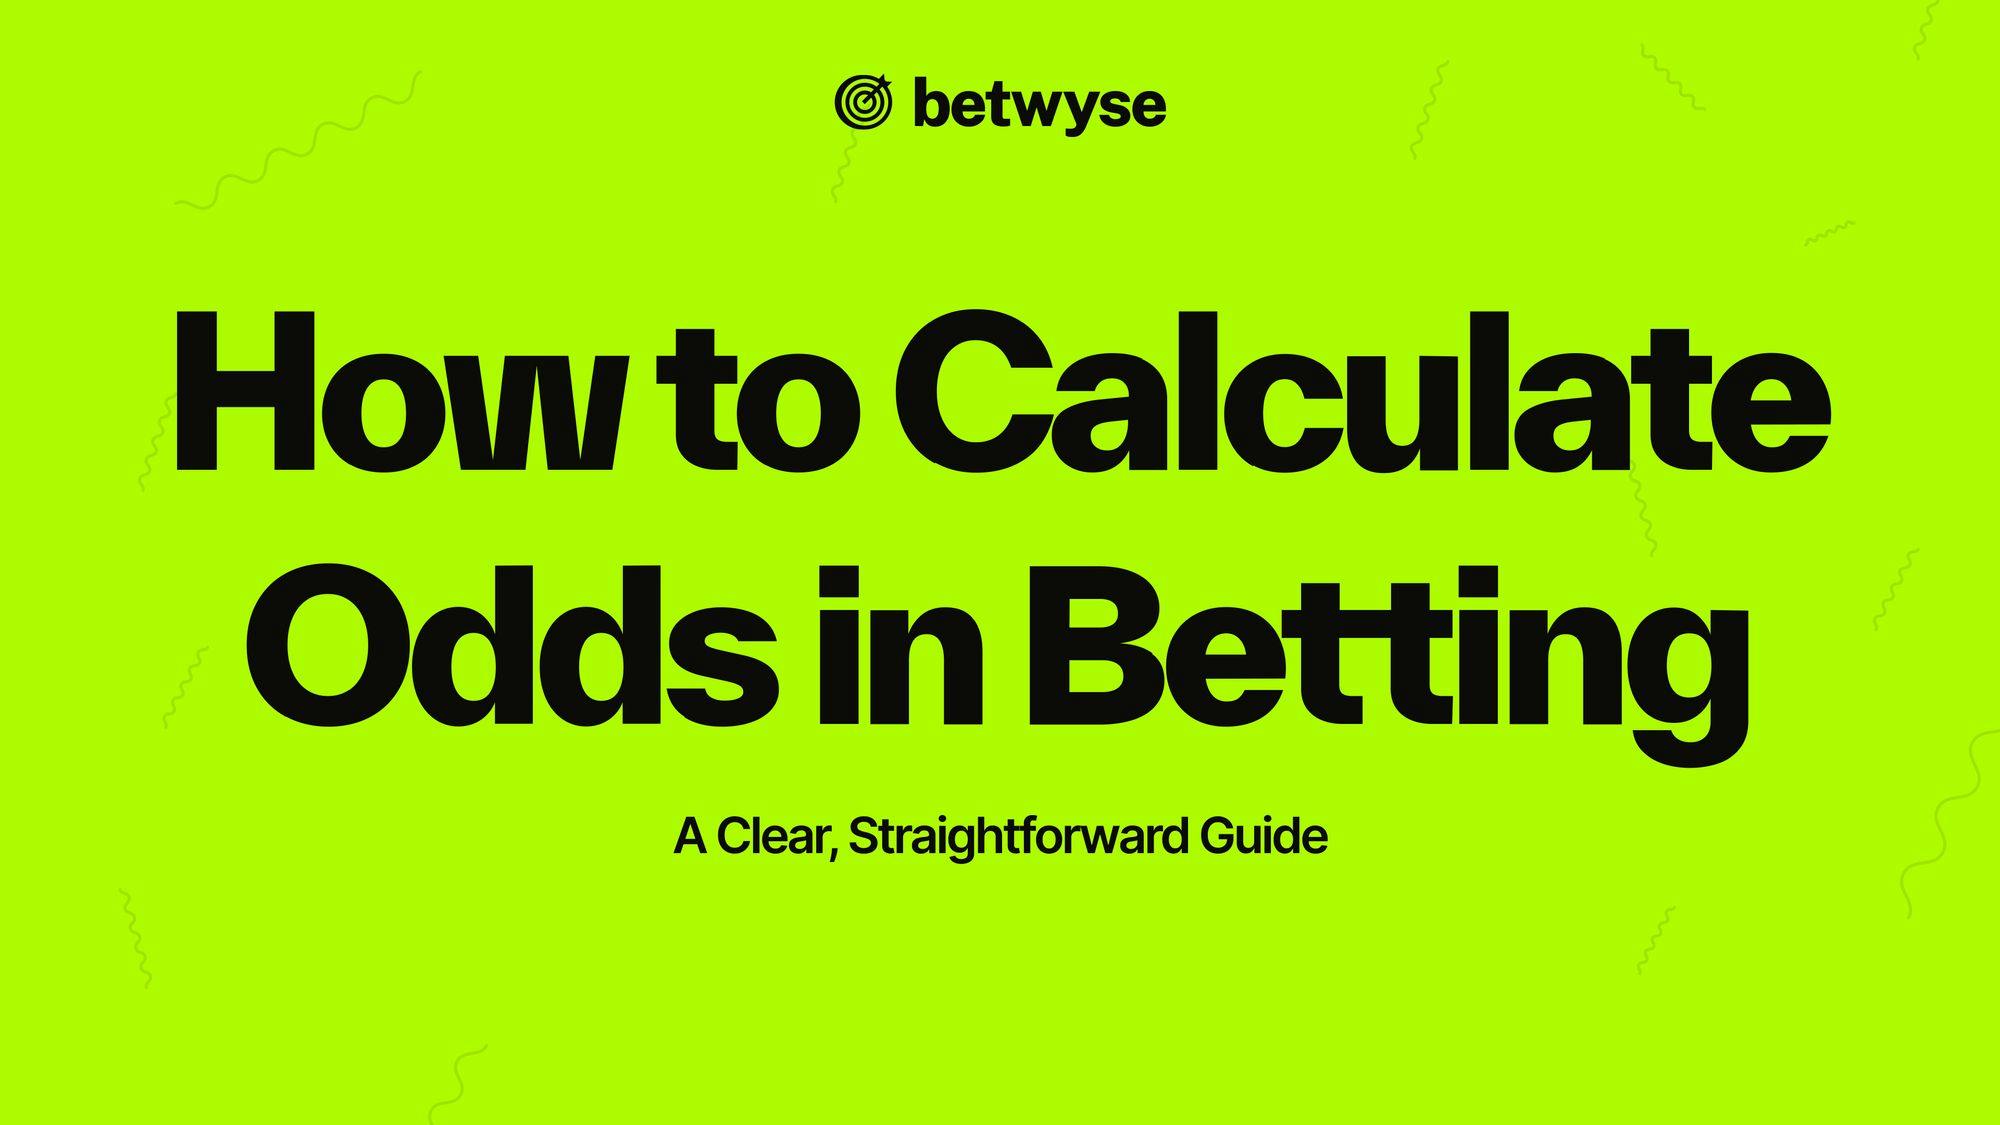 how to calculate odds in betting image